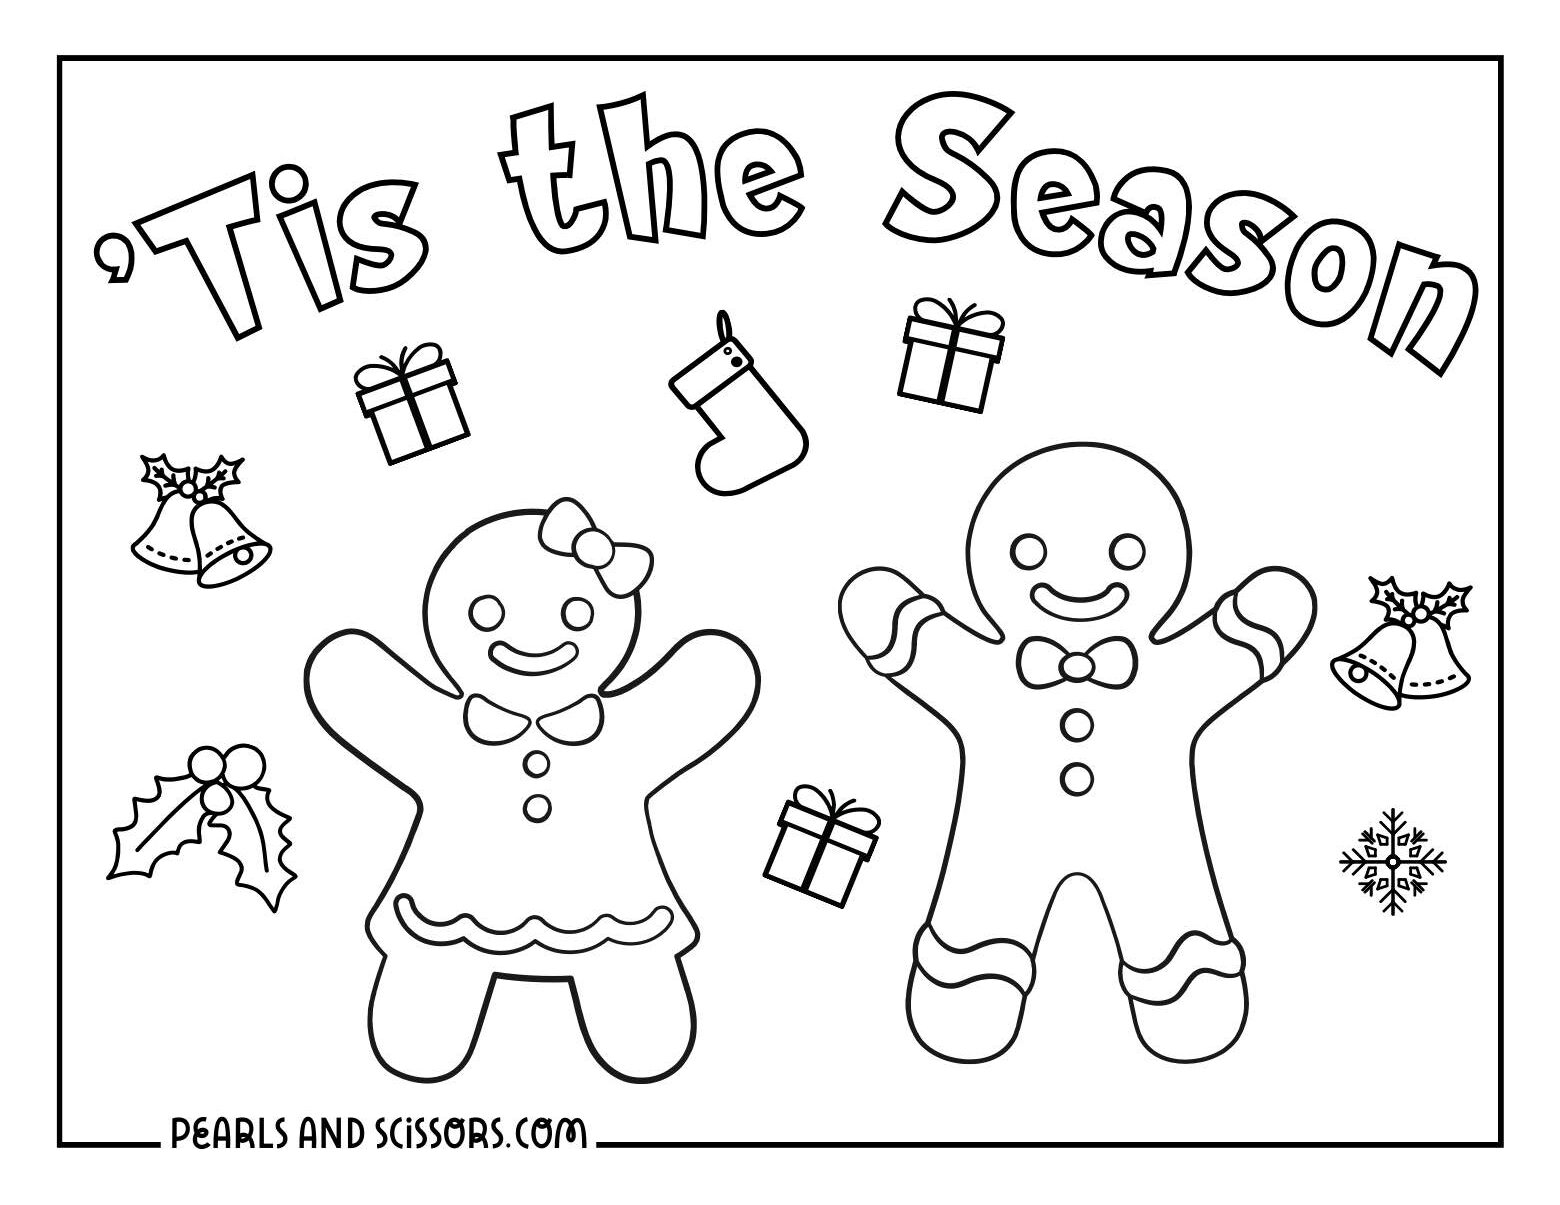 Gingerbread men and women christmas coloring page.